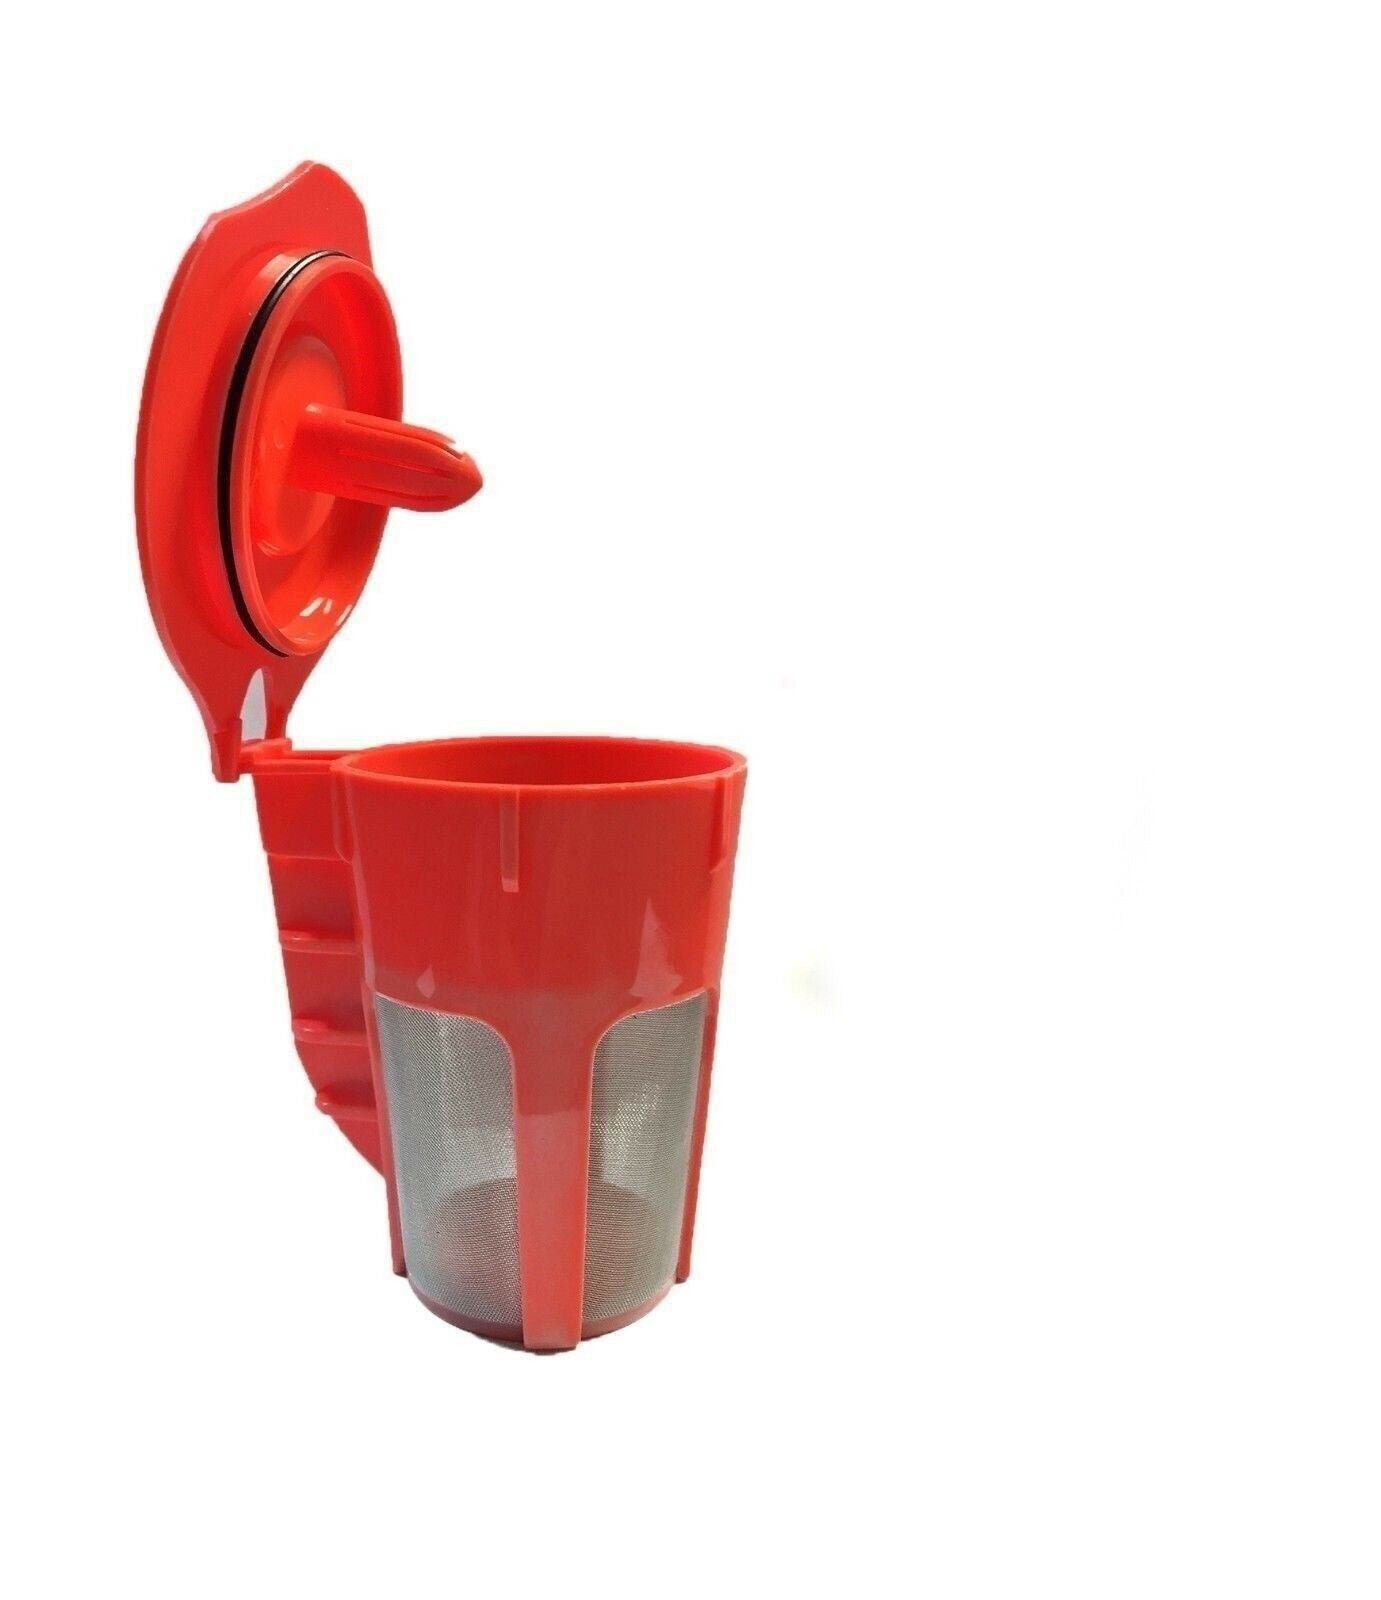 Refillable Reusable K-Cup K Carafe Coffee Filter Pod for Keurig 2.0 1.0 Coffees